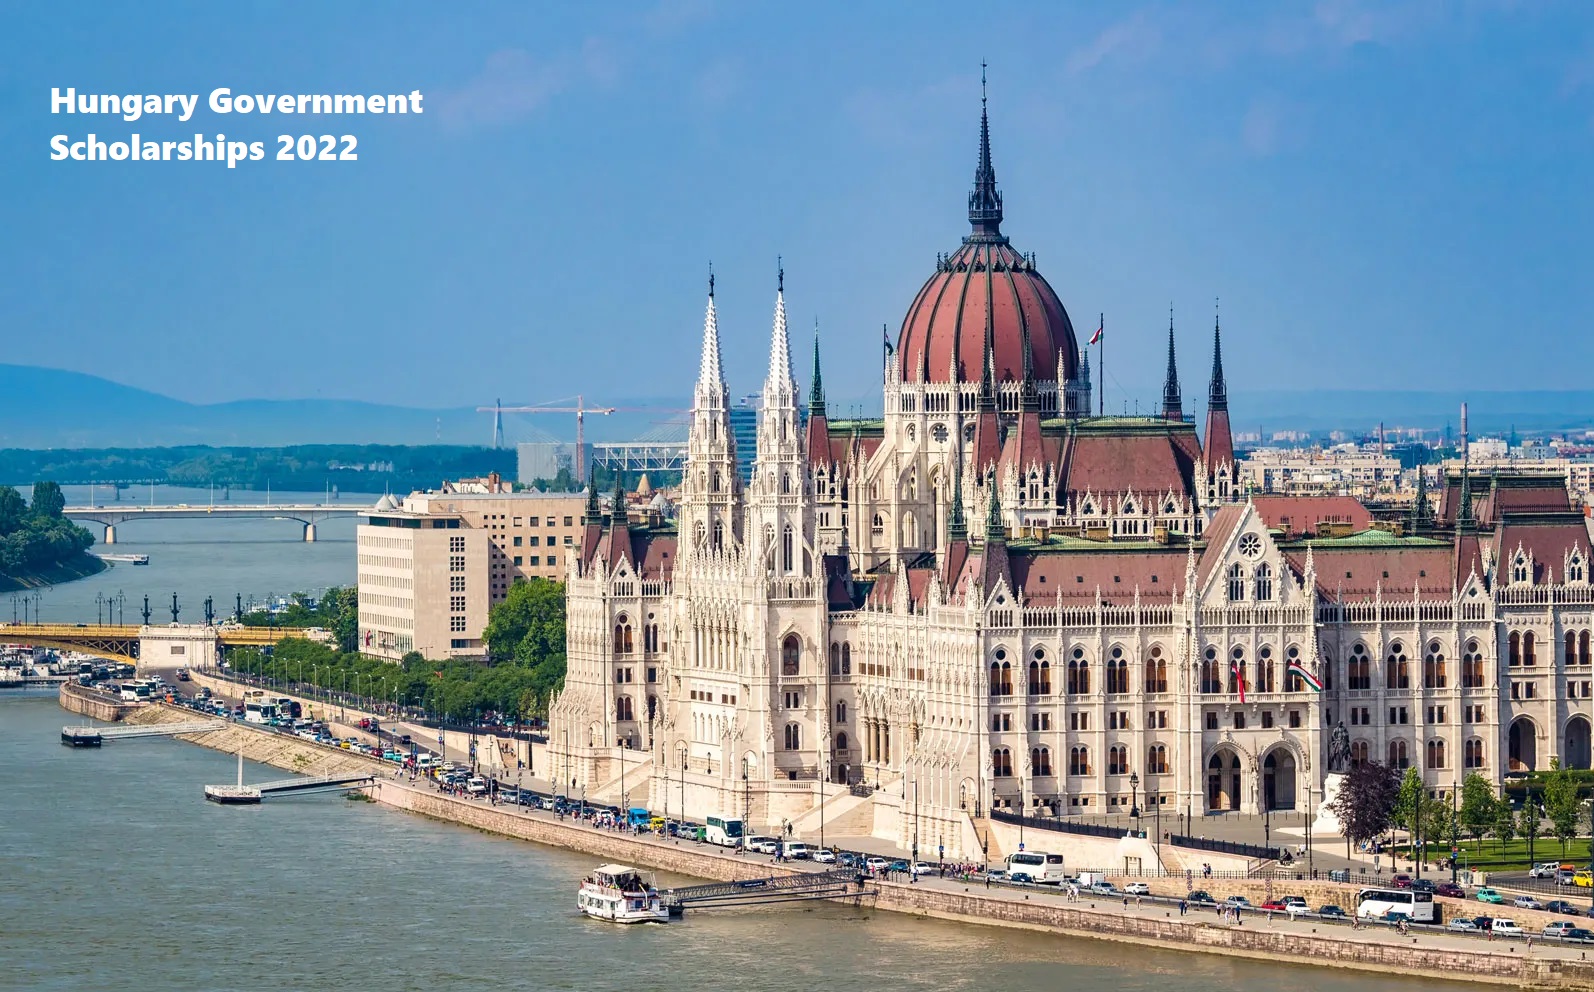 Hungary Government Scholarships 2022 